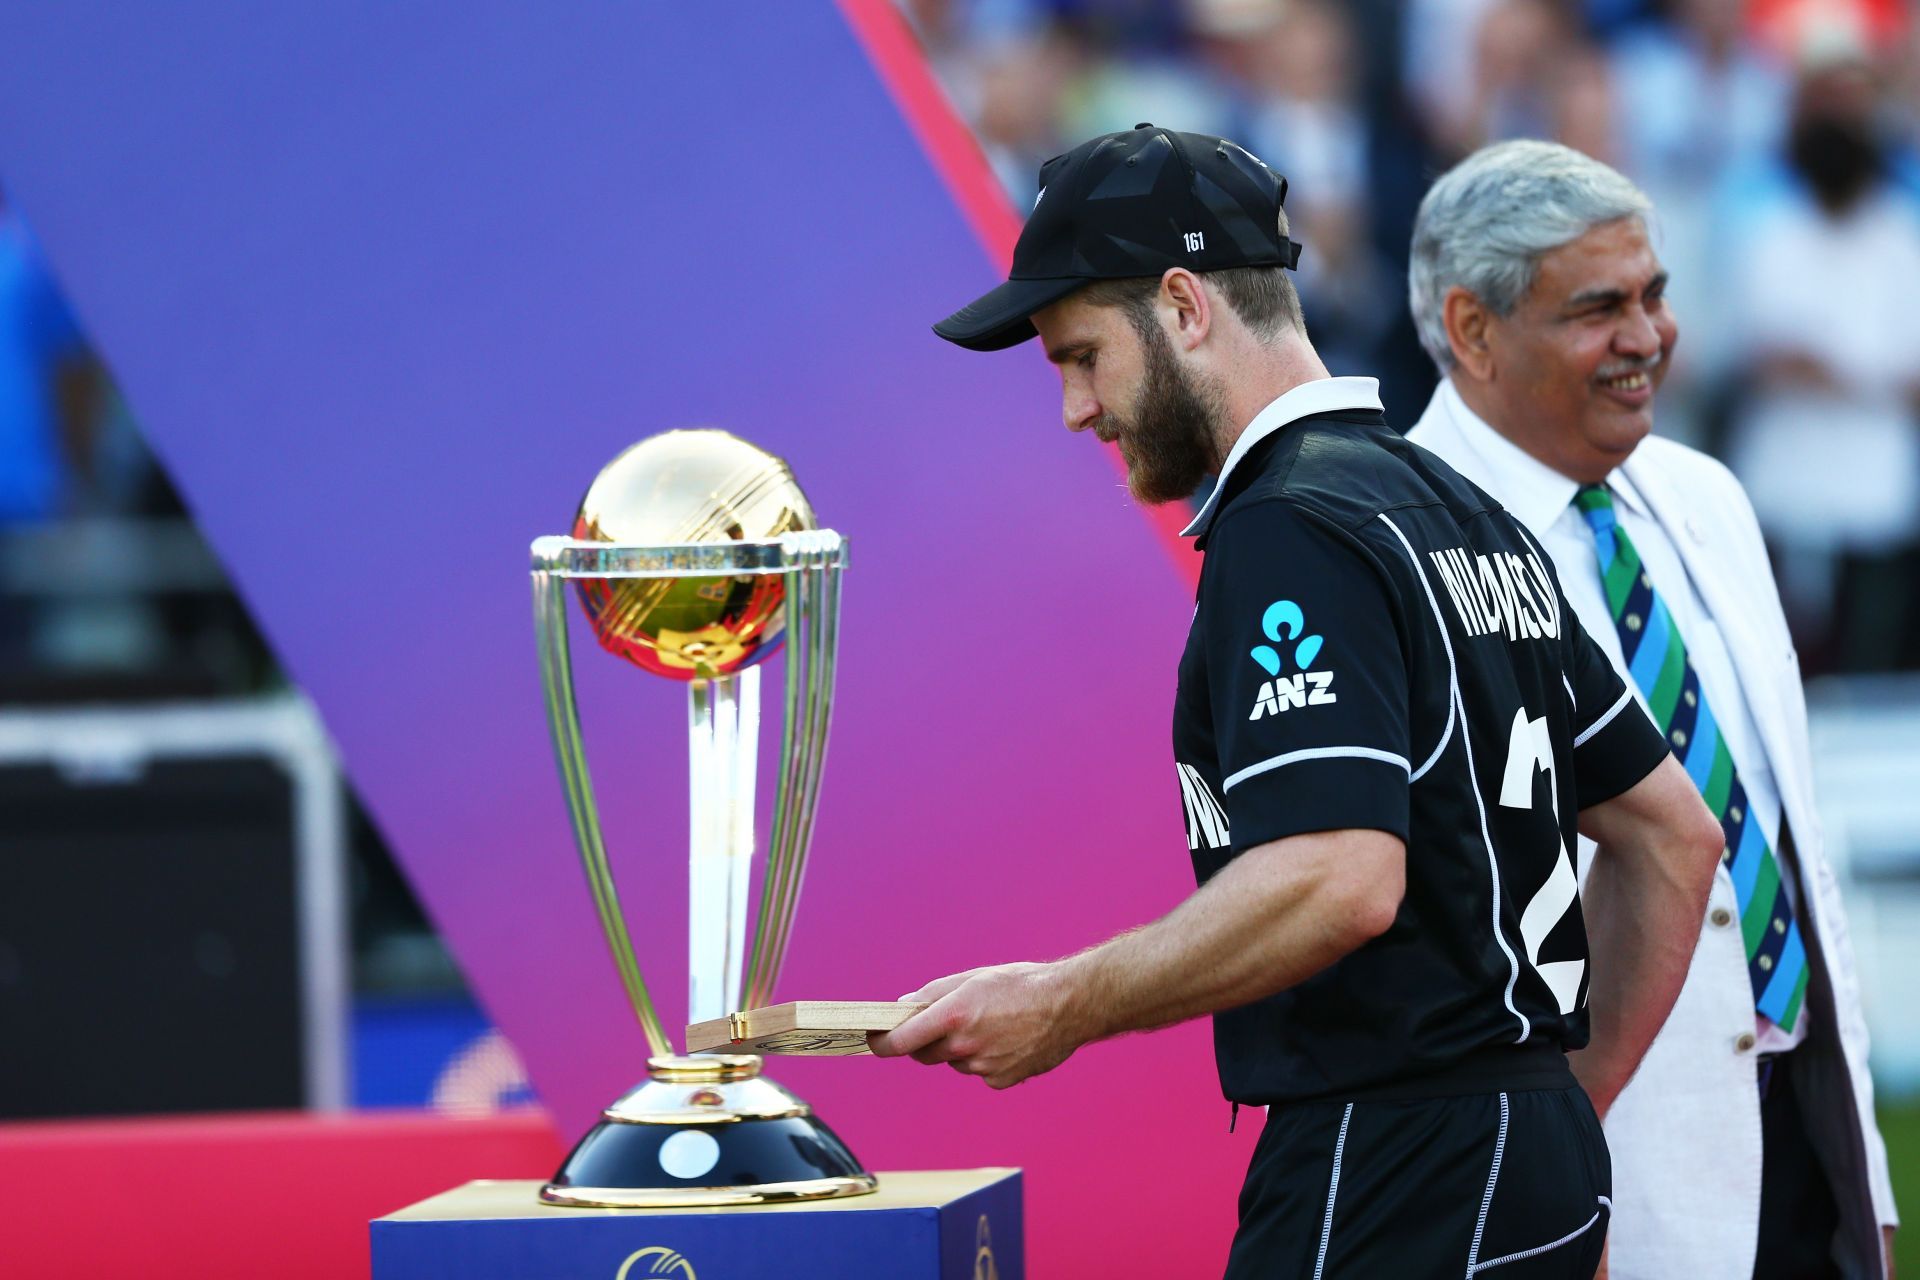 Kane Williamson led New Zealand to the final of the 2019 World Cup (Image courtesy: Getty Images)